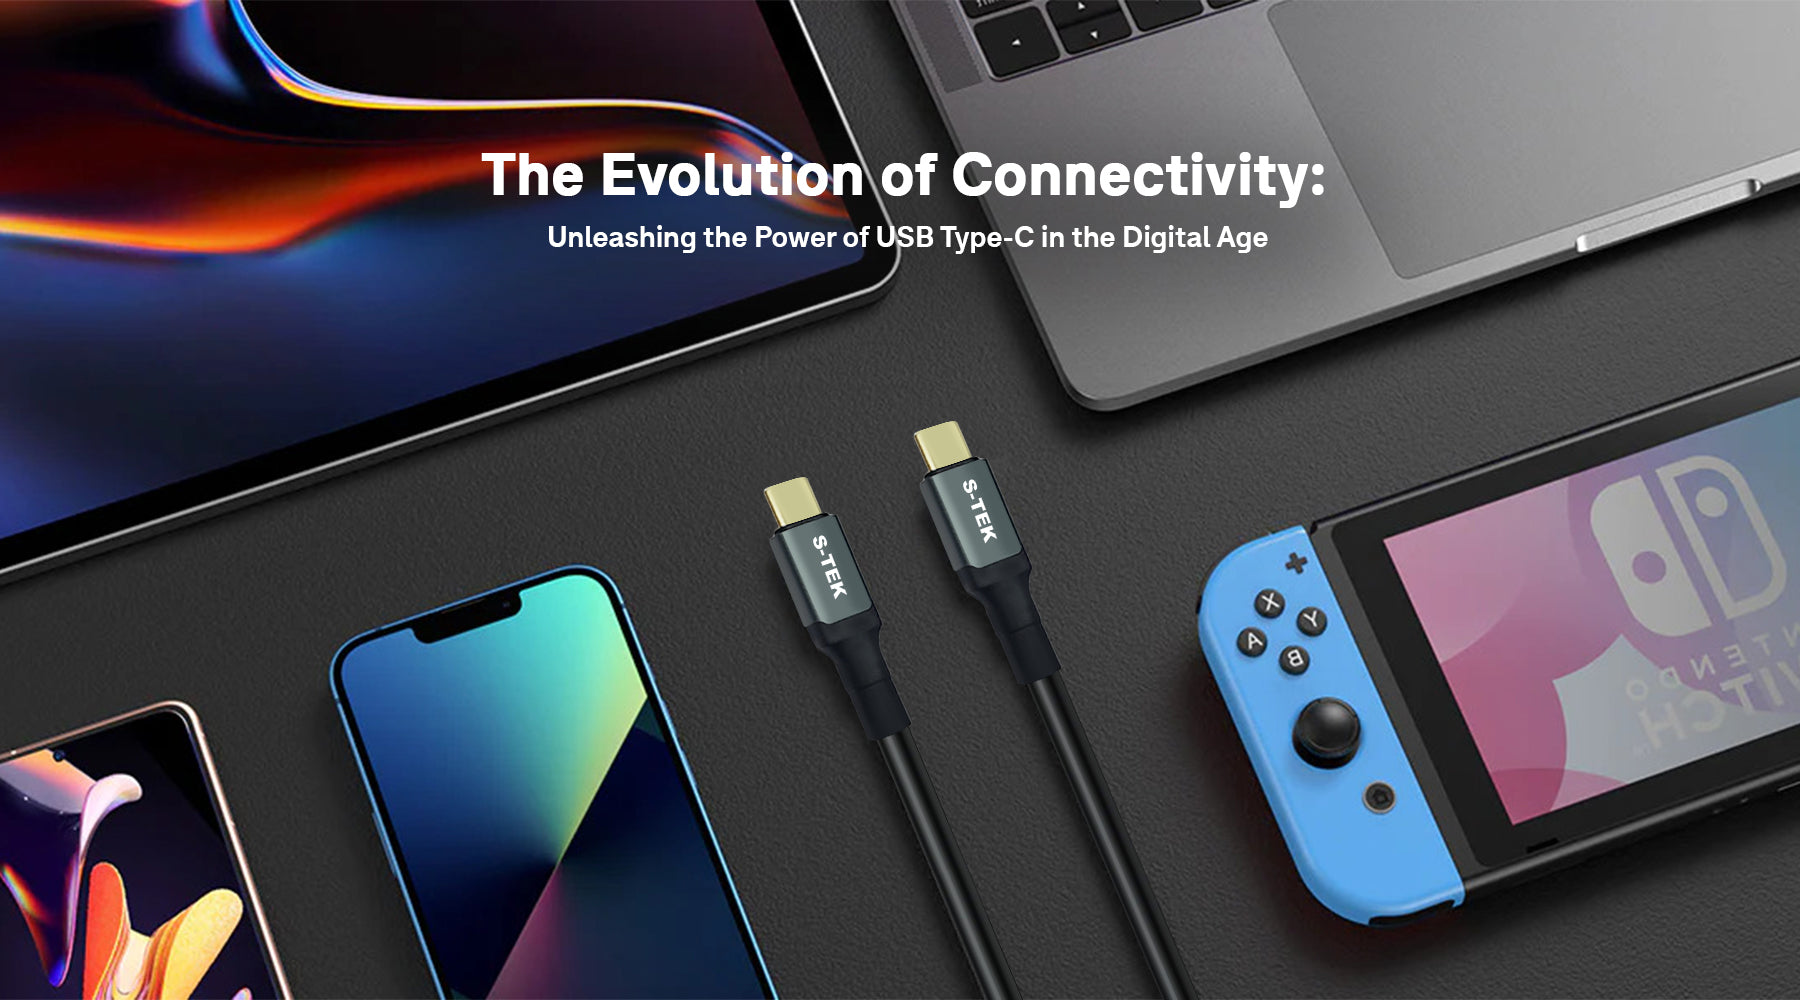 The Evolution of Connectivity: Unleashing the Power of USB Type-C in the Digital Age